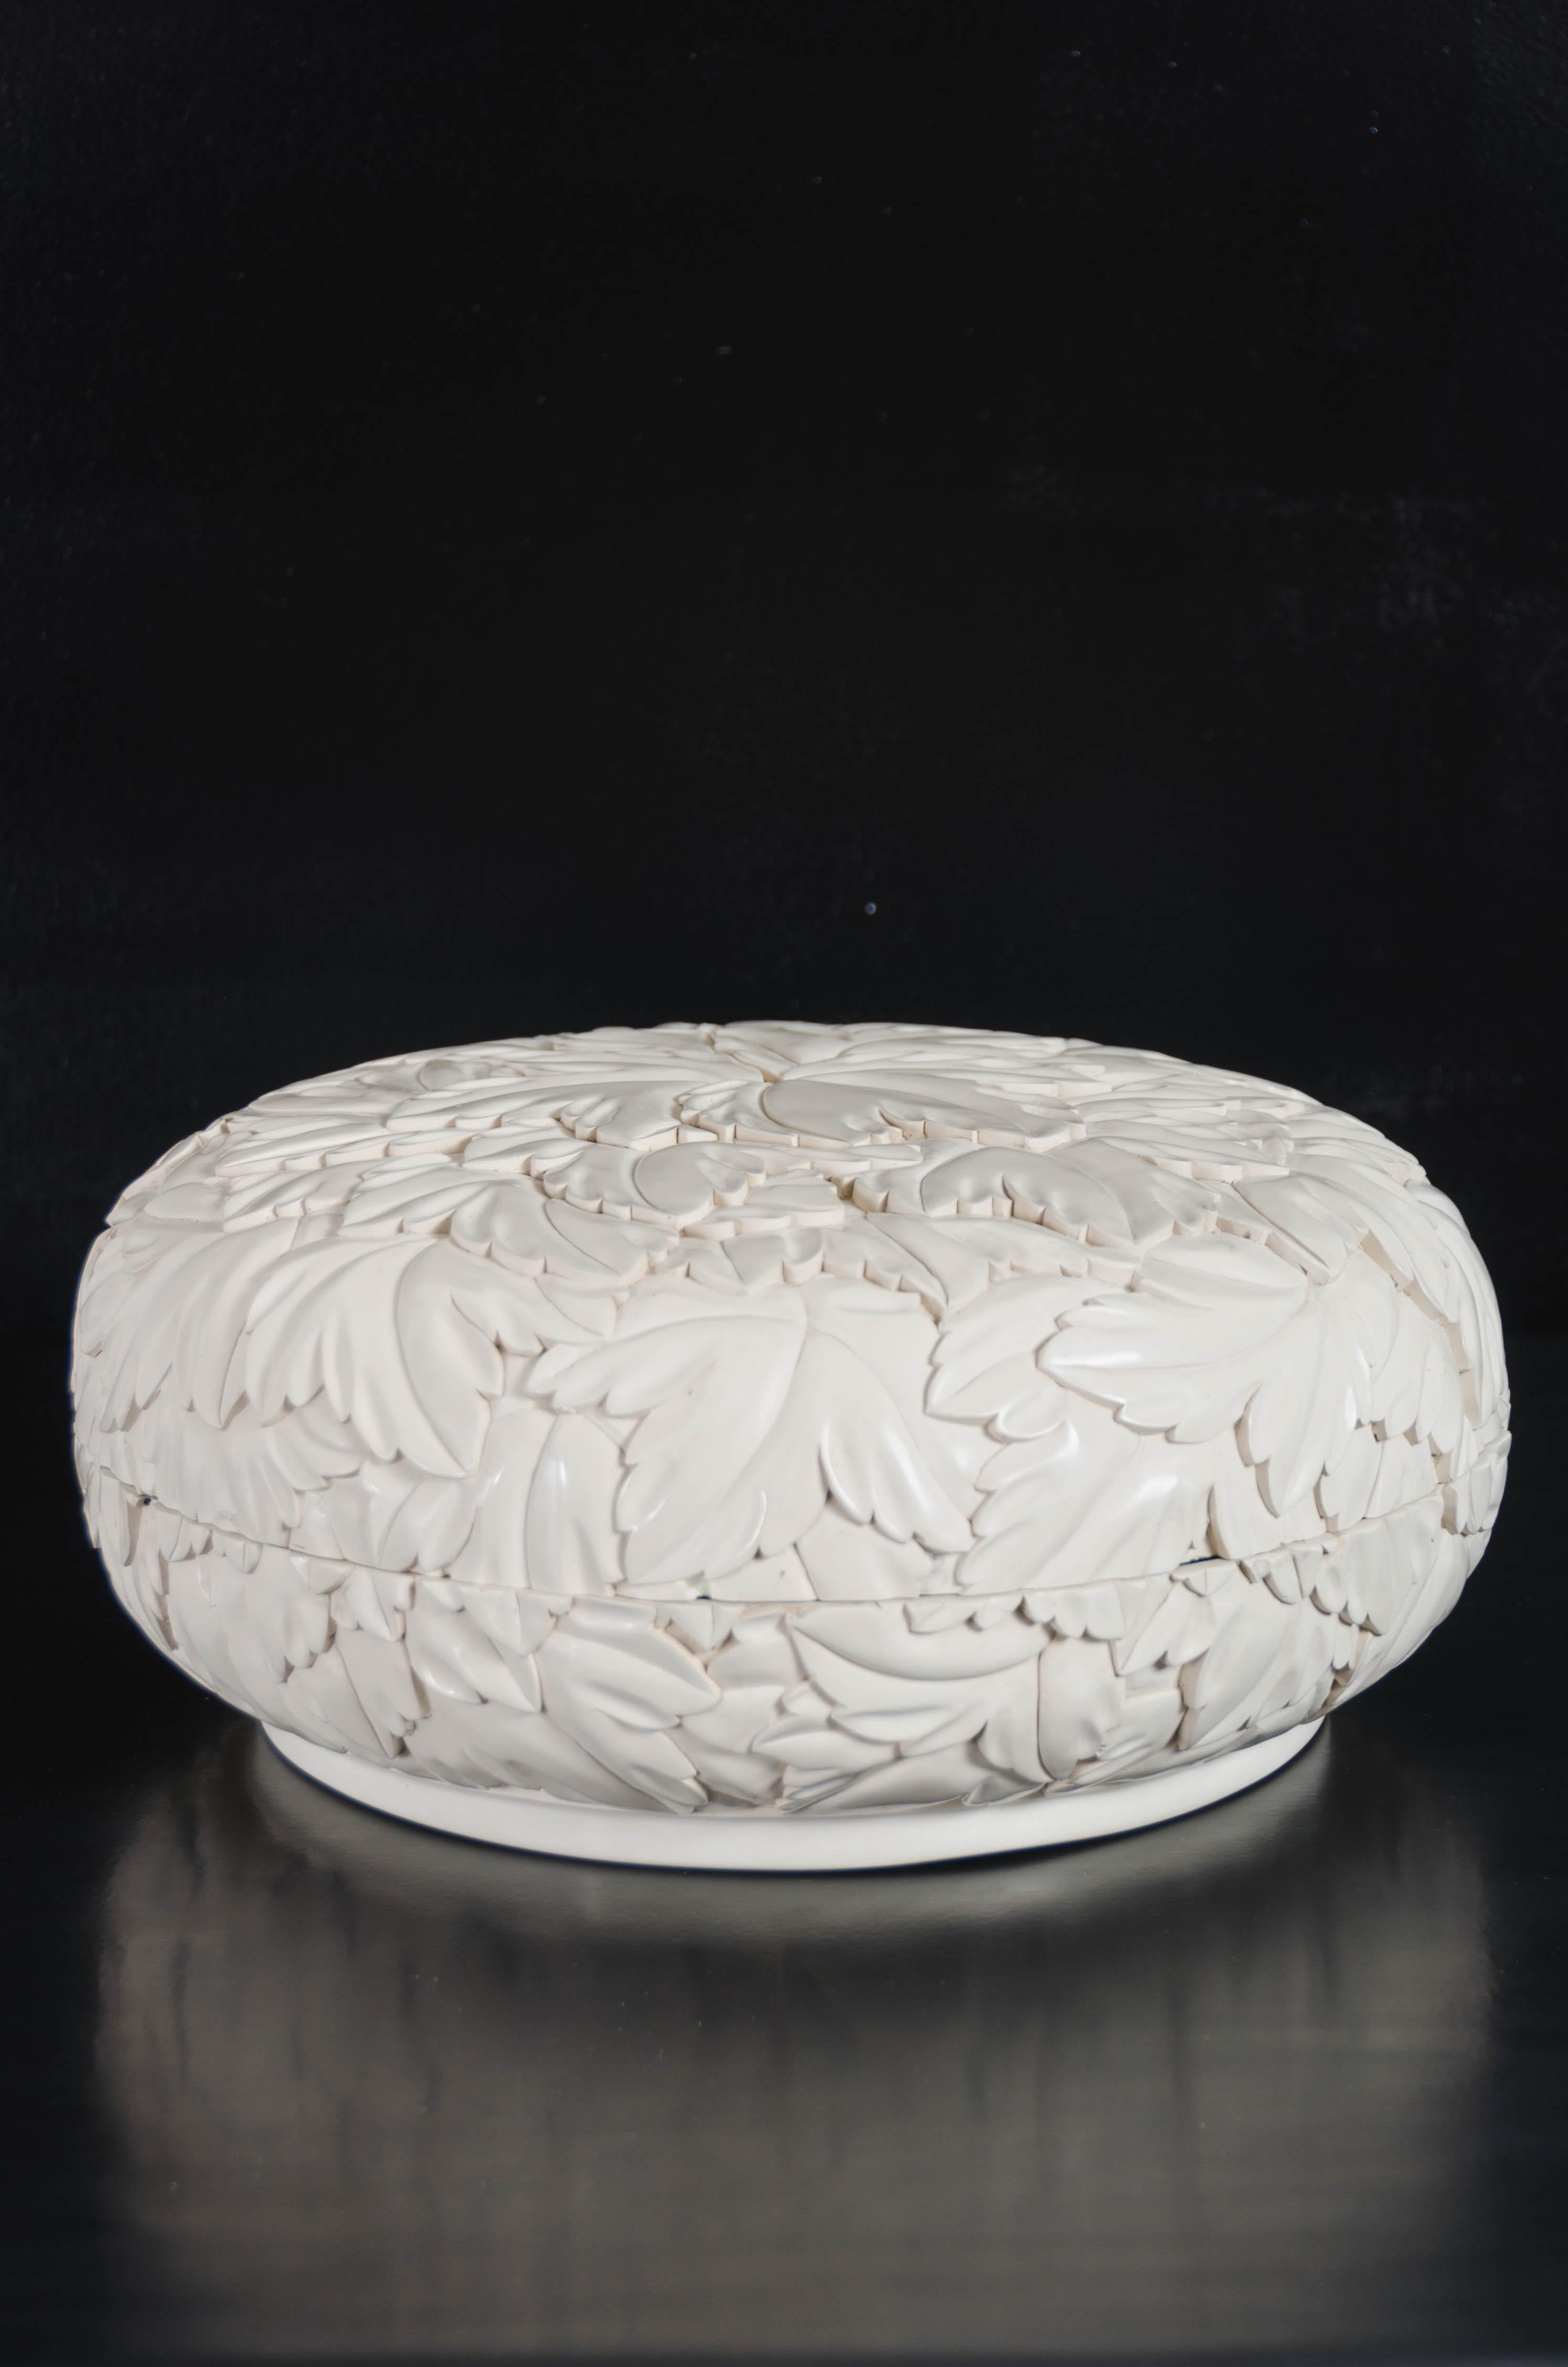 Round leaf design box
Cream lacquer
Hand-carved
Wood base
Limited edition
In stock

Lacquer is a technique that dates back to the Shang dynasty, circa 1600-1100 B.C. These pieces are made with at least 60 coats of organic lacquer. Each layer of